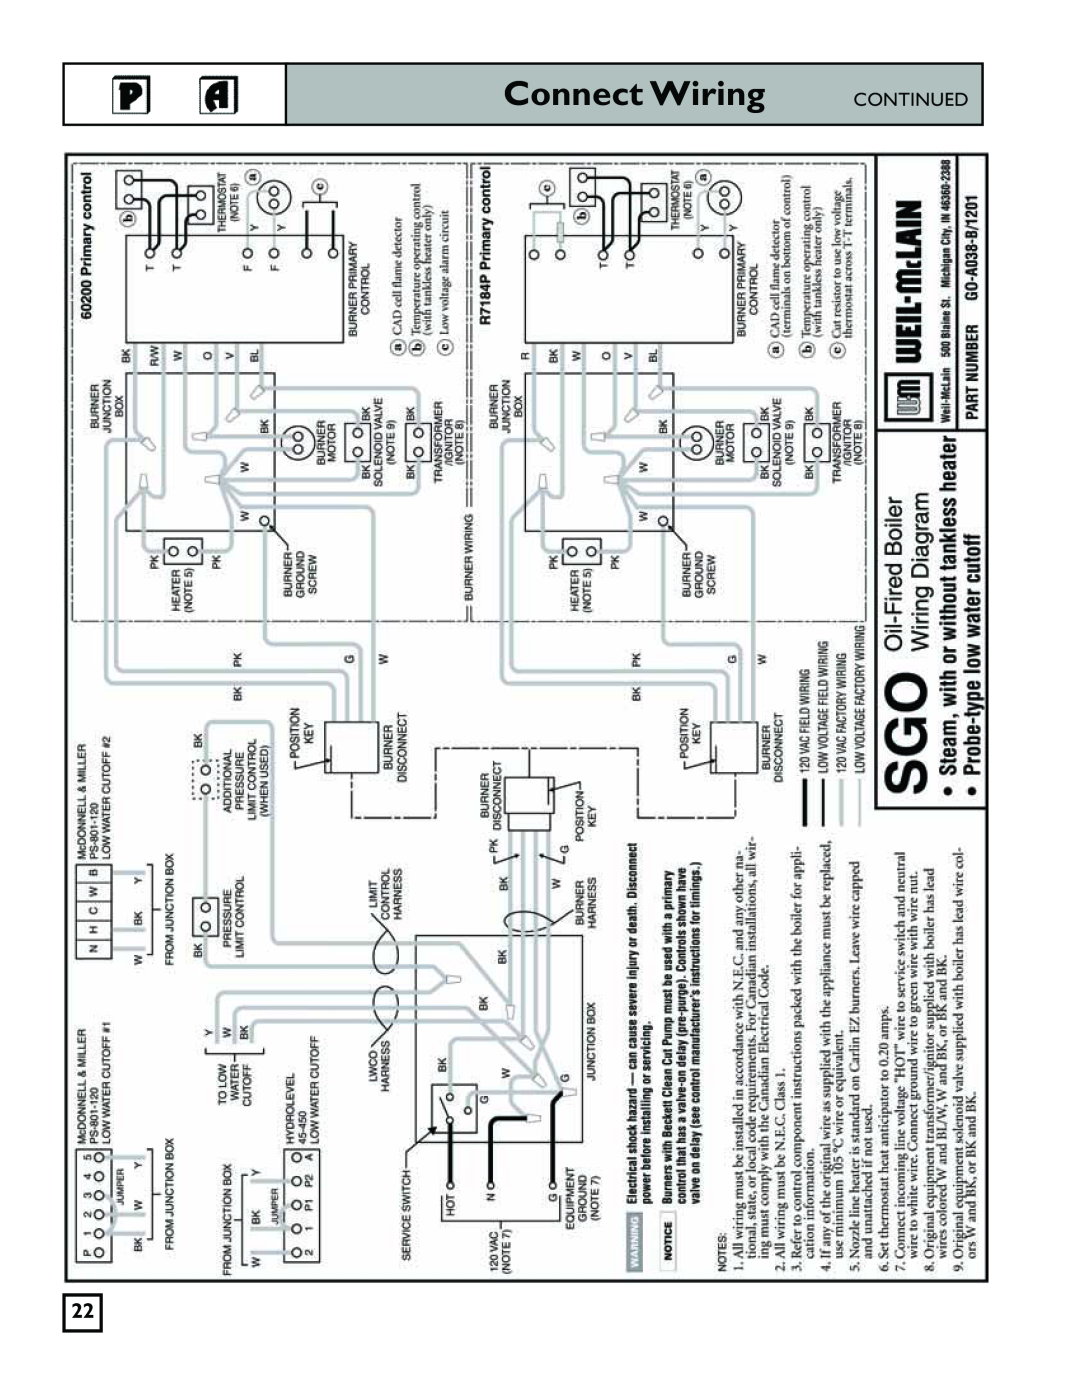 Weil-McLain 550-141-829/1201 manual Connect Wiring, Continued 